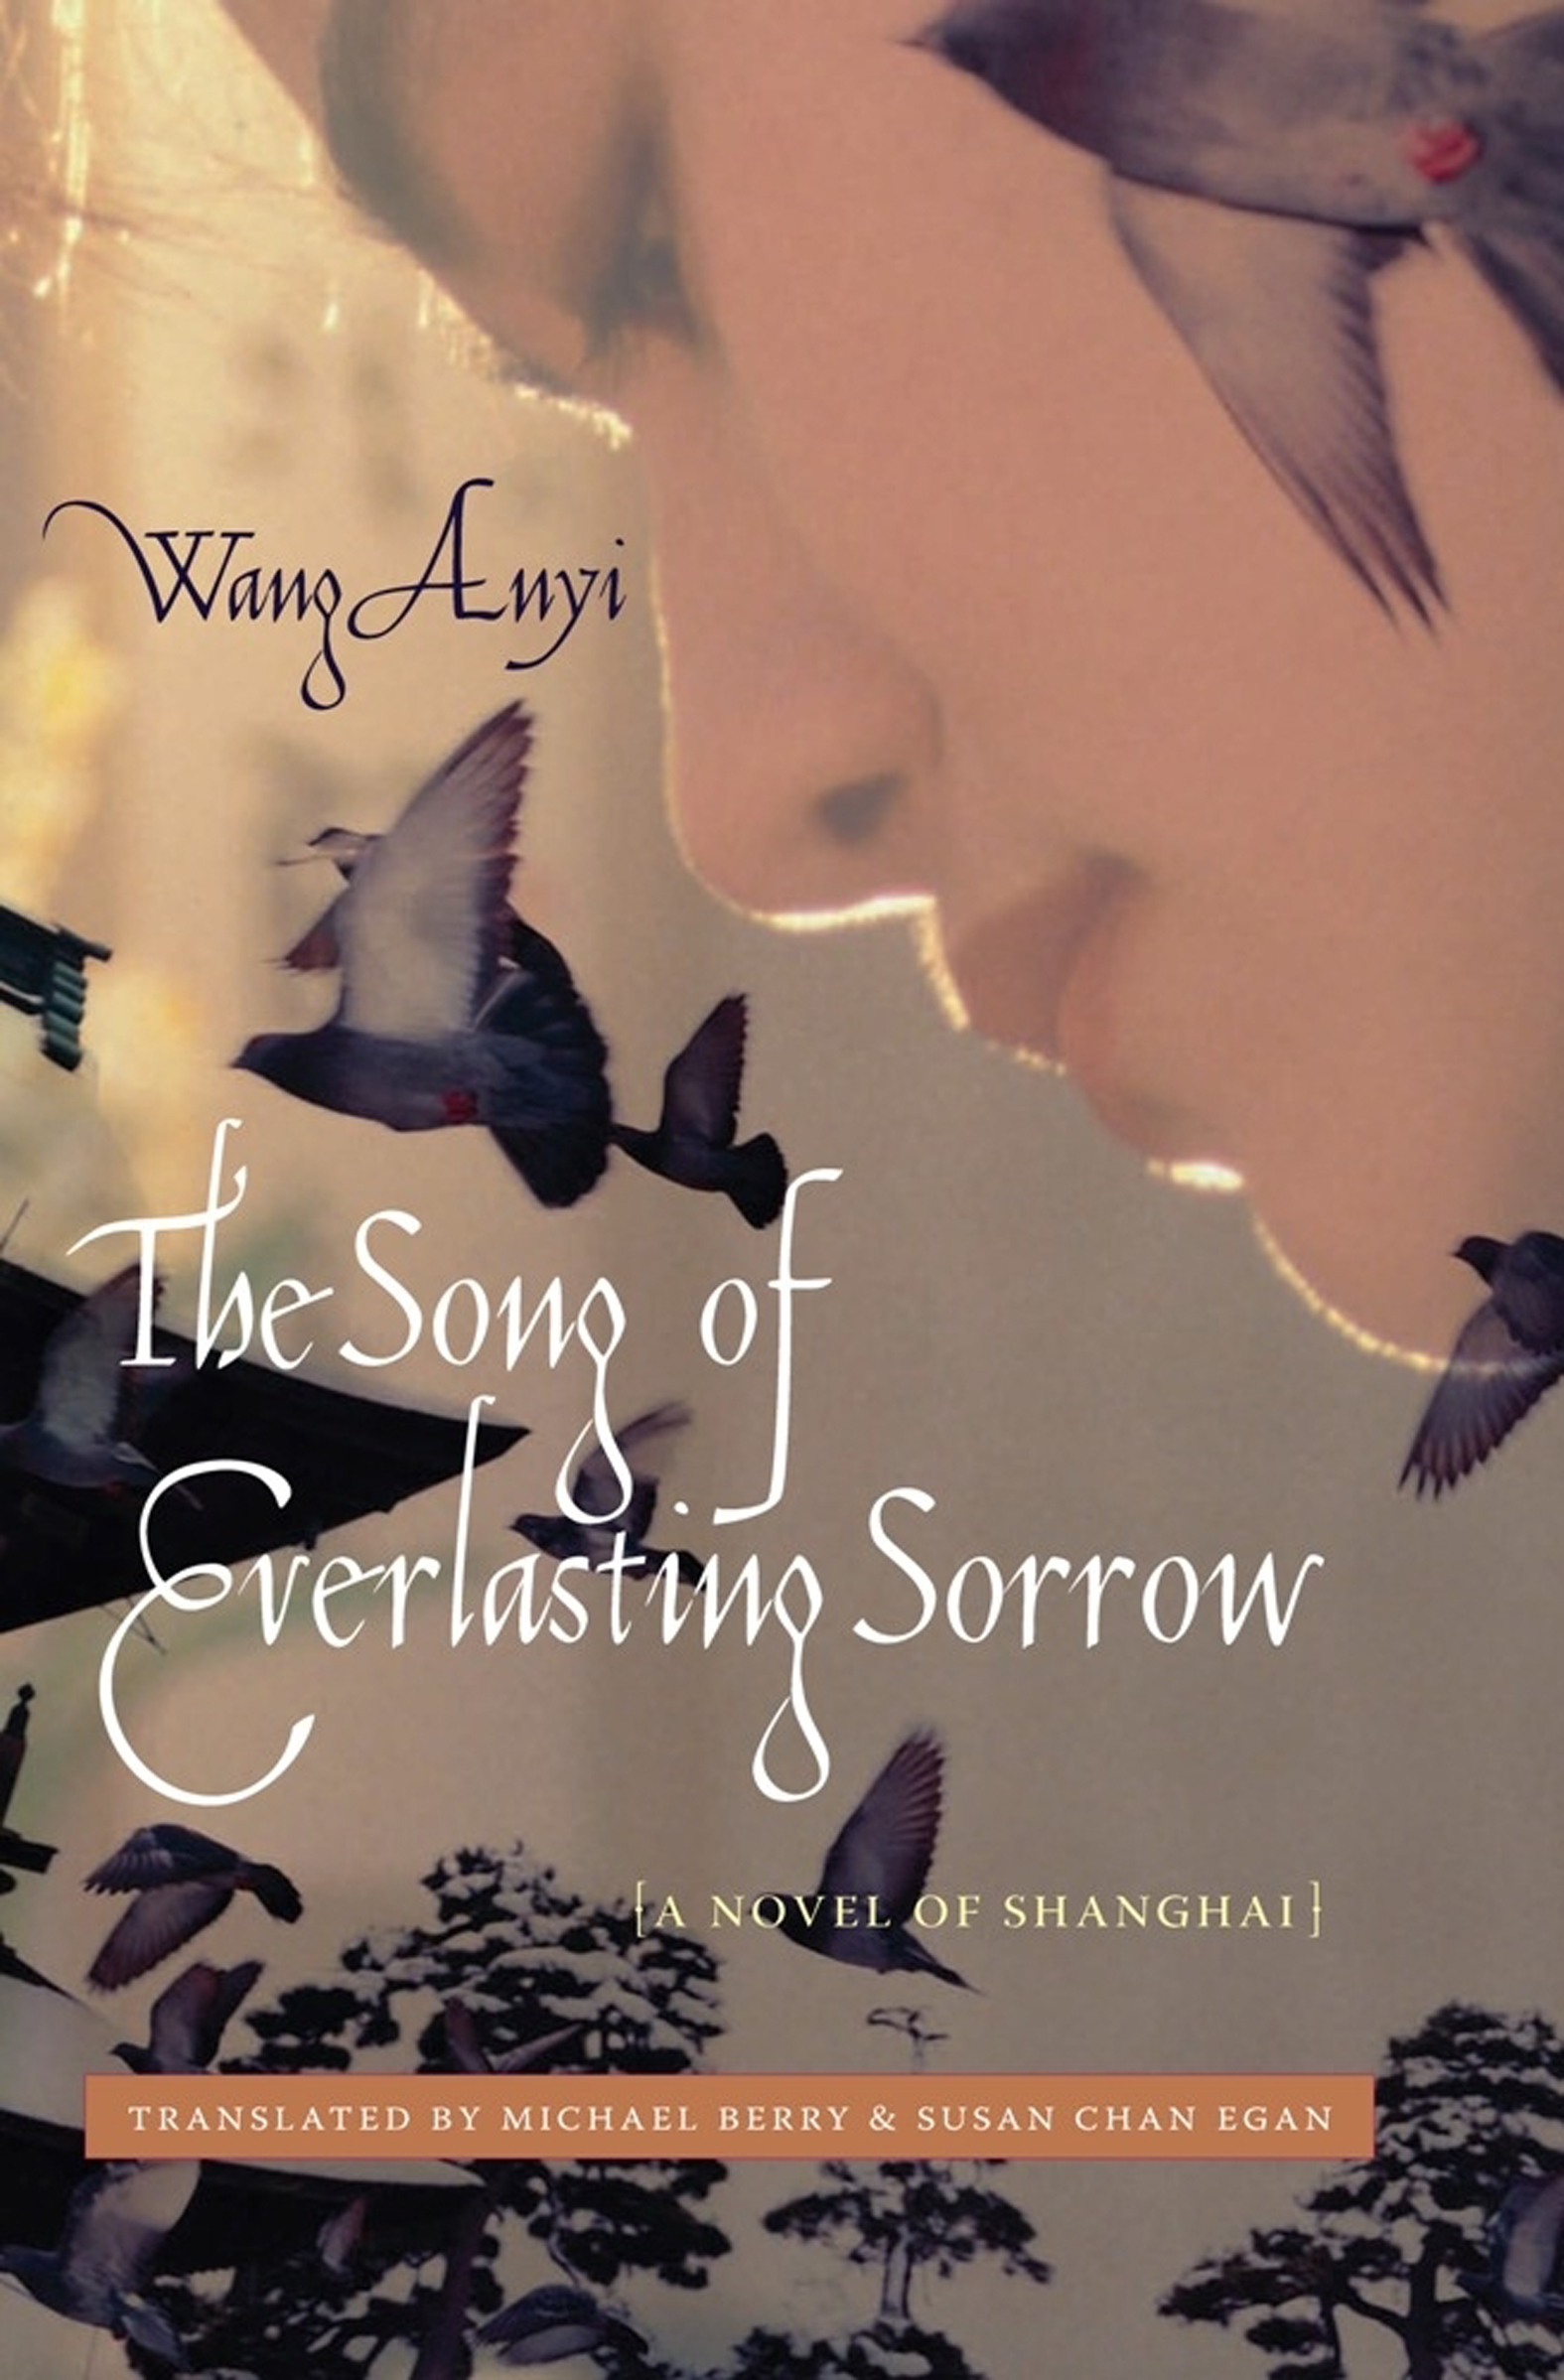 The Song of Everlasting Sorrow - 15-24.99